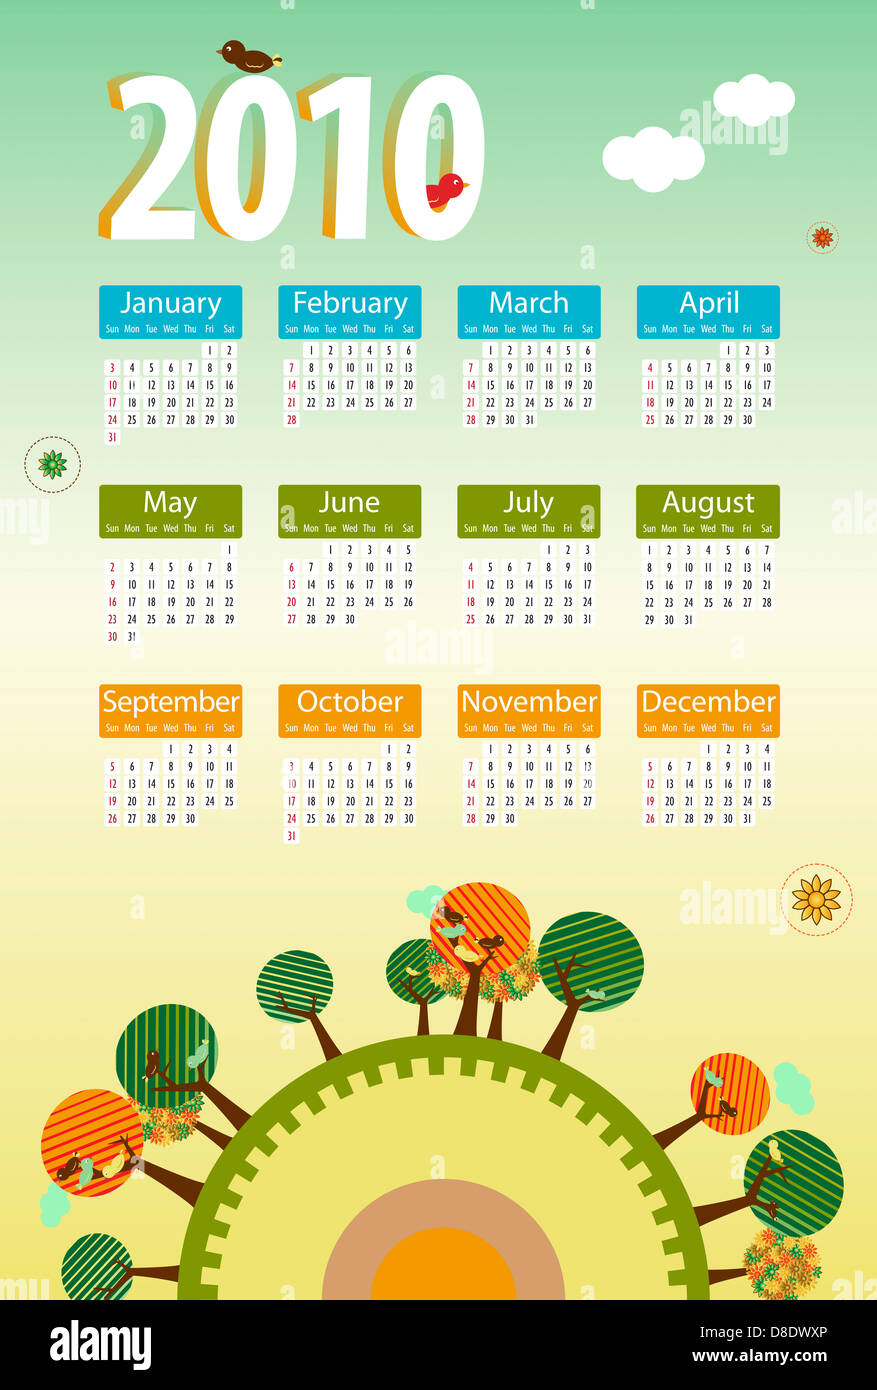 Calendar 2010 environmental retro planet with trees,birds,flowers and clouds Stock Photo